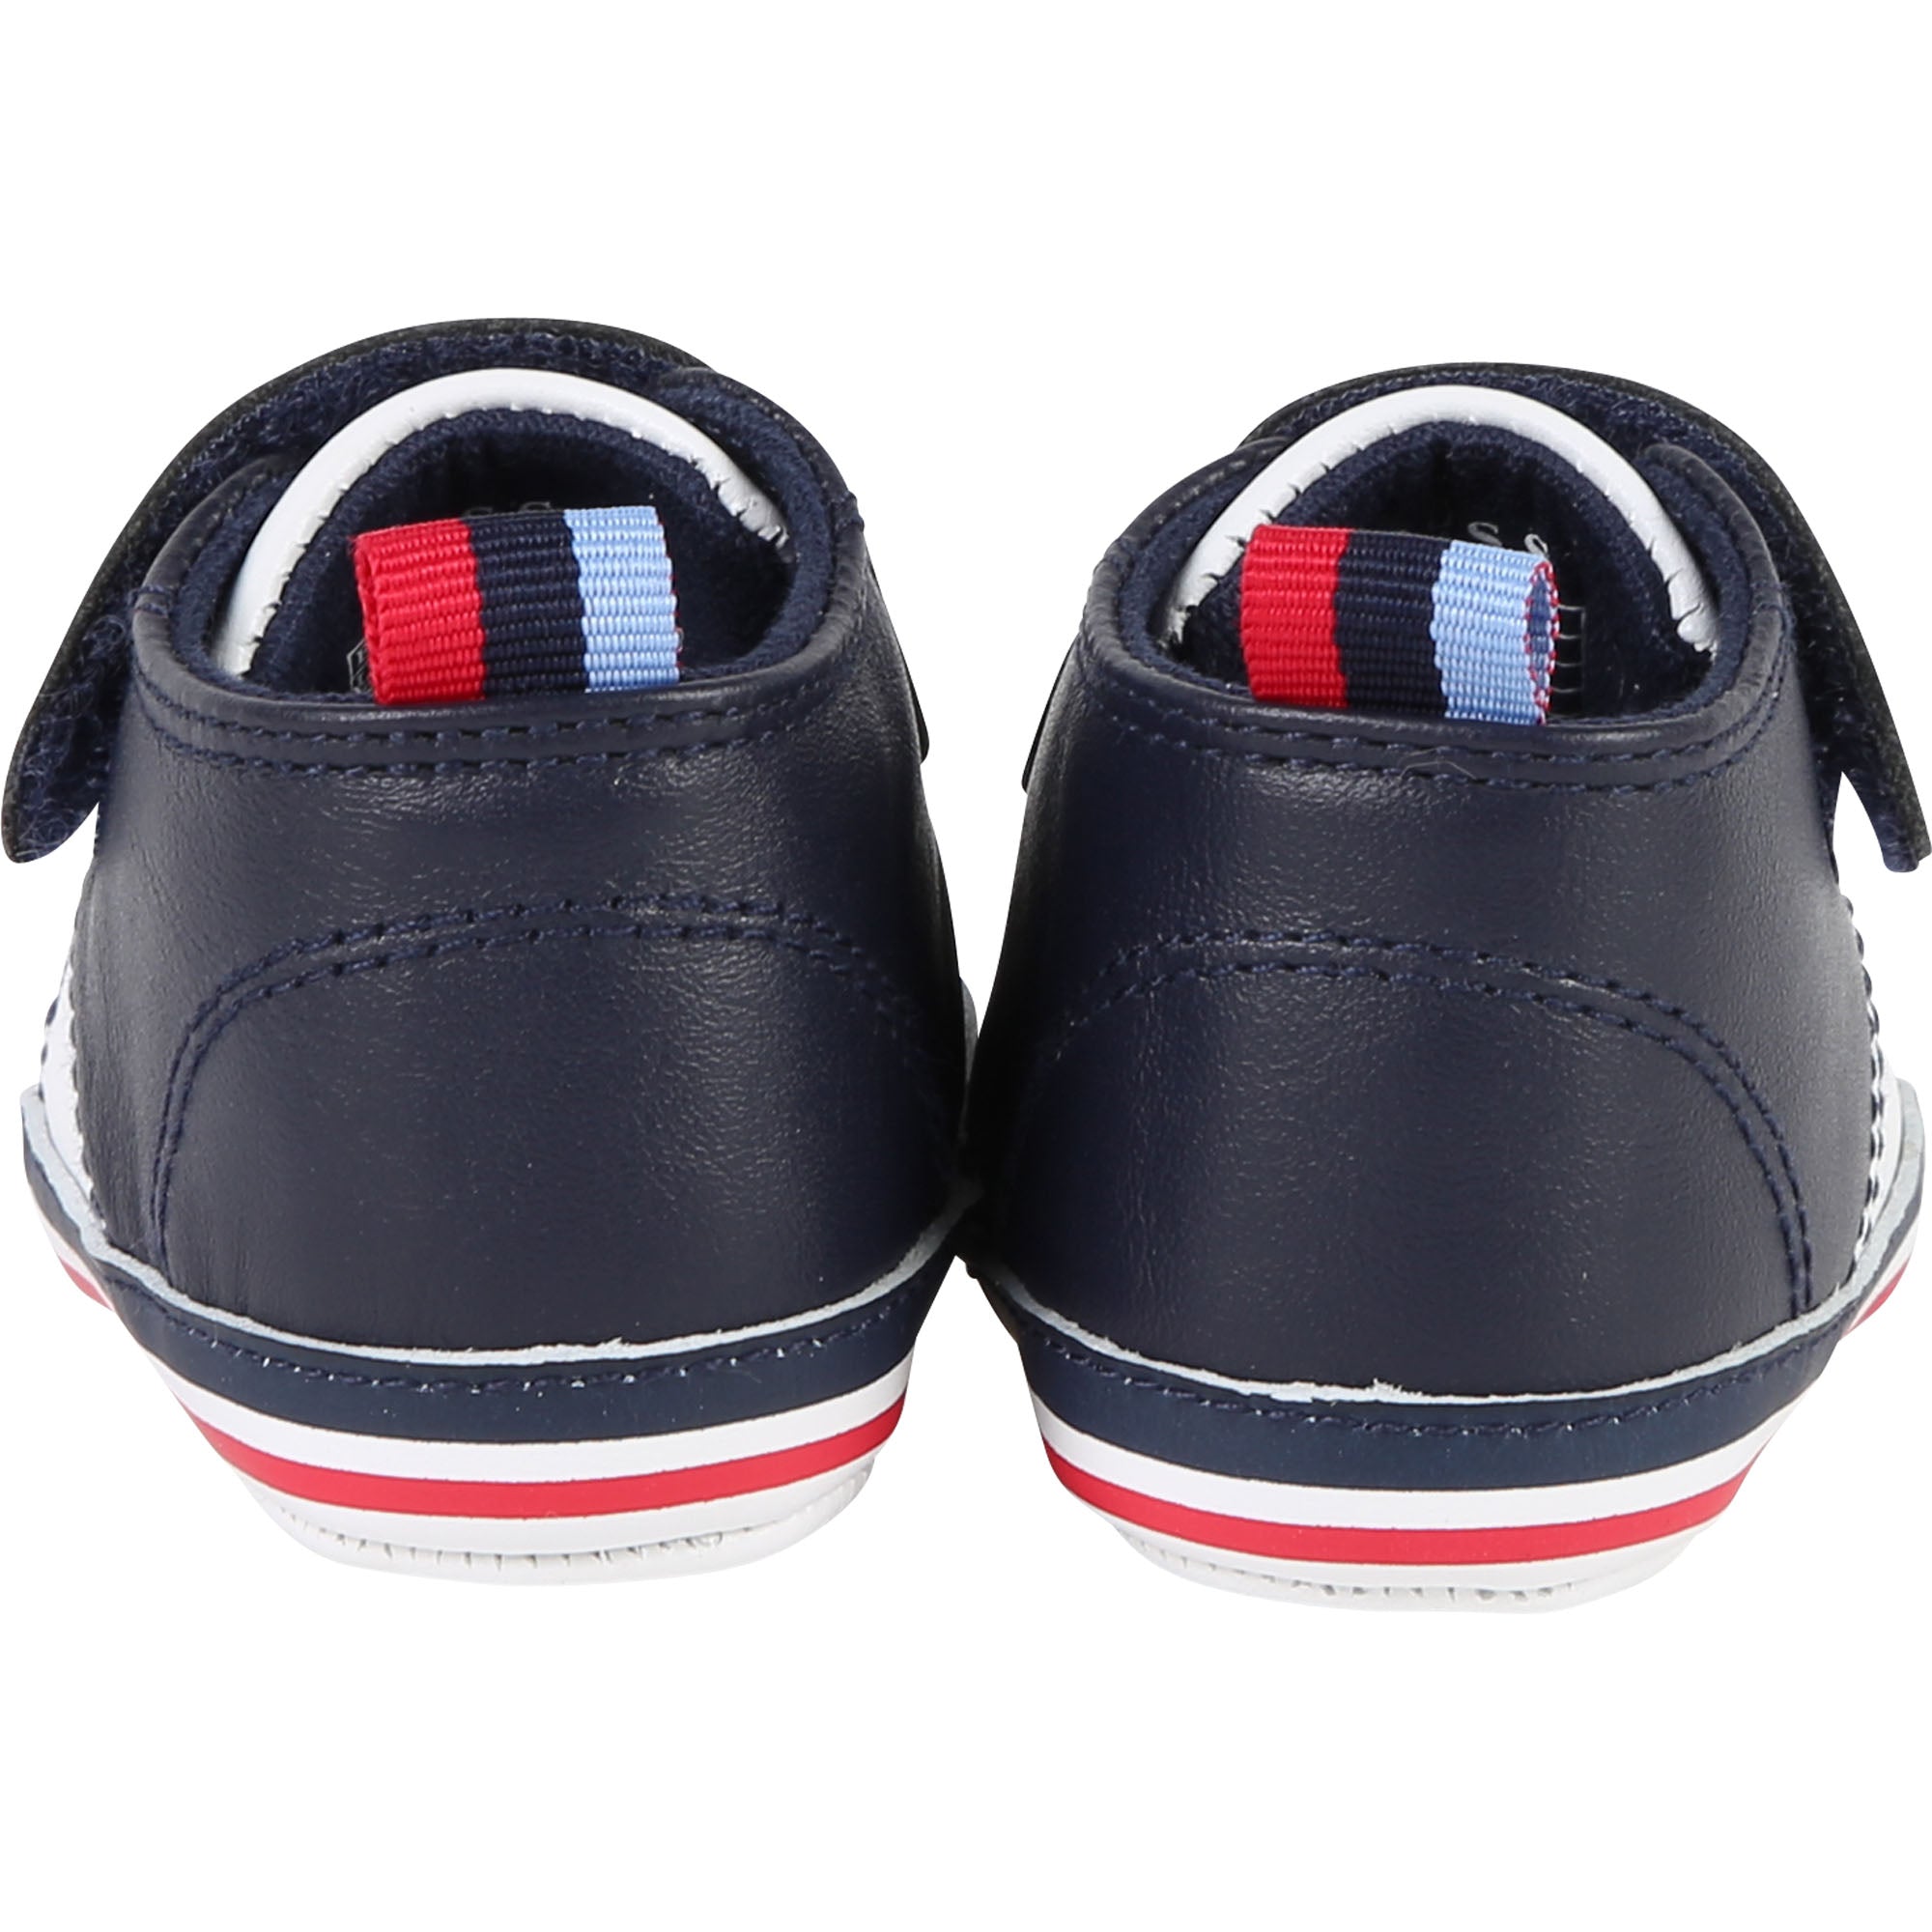 Baby Boys Black & White Cow Leather Shoes